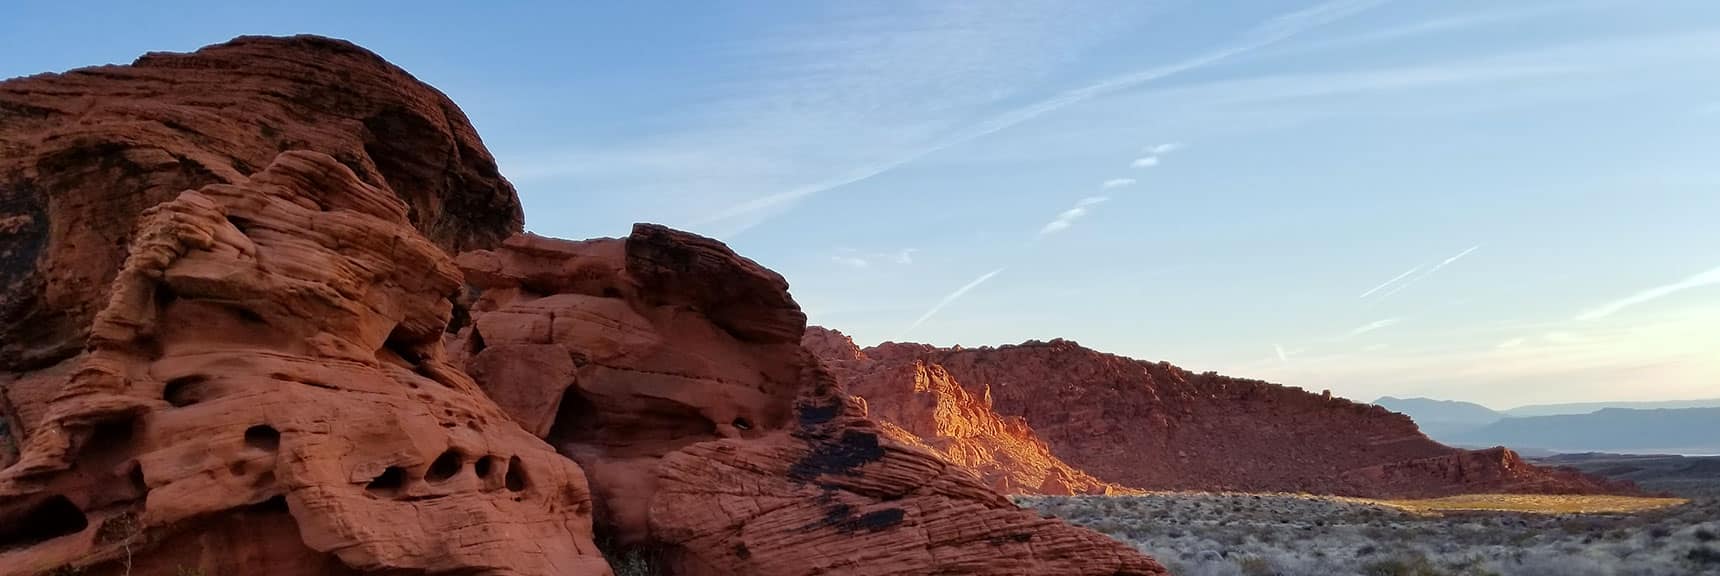 View Behind and North of the Park's Bee Hives Formations on Old Arrowhead Trail in Valley of Fire State Park, Nevada